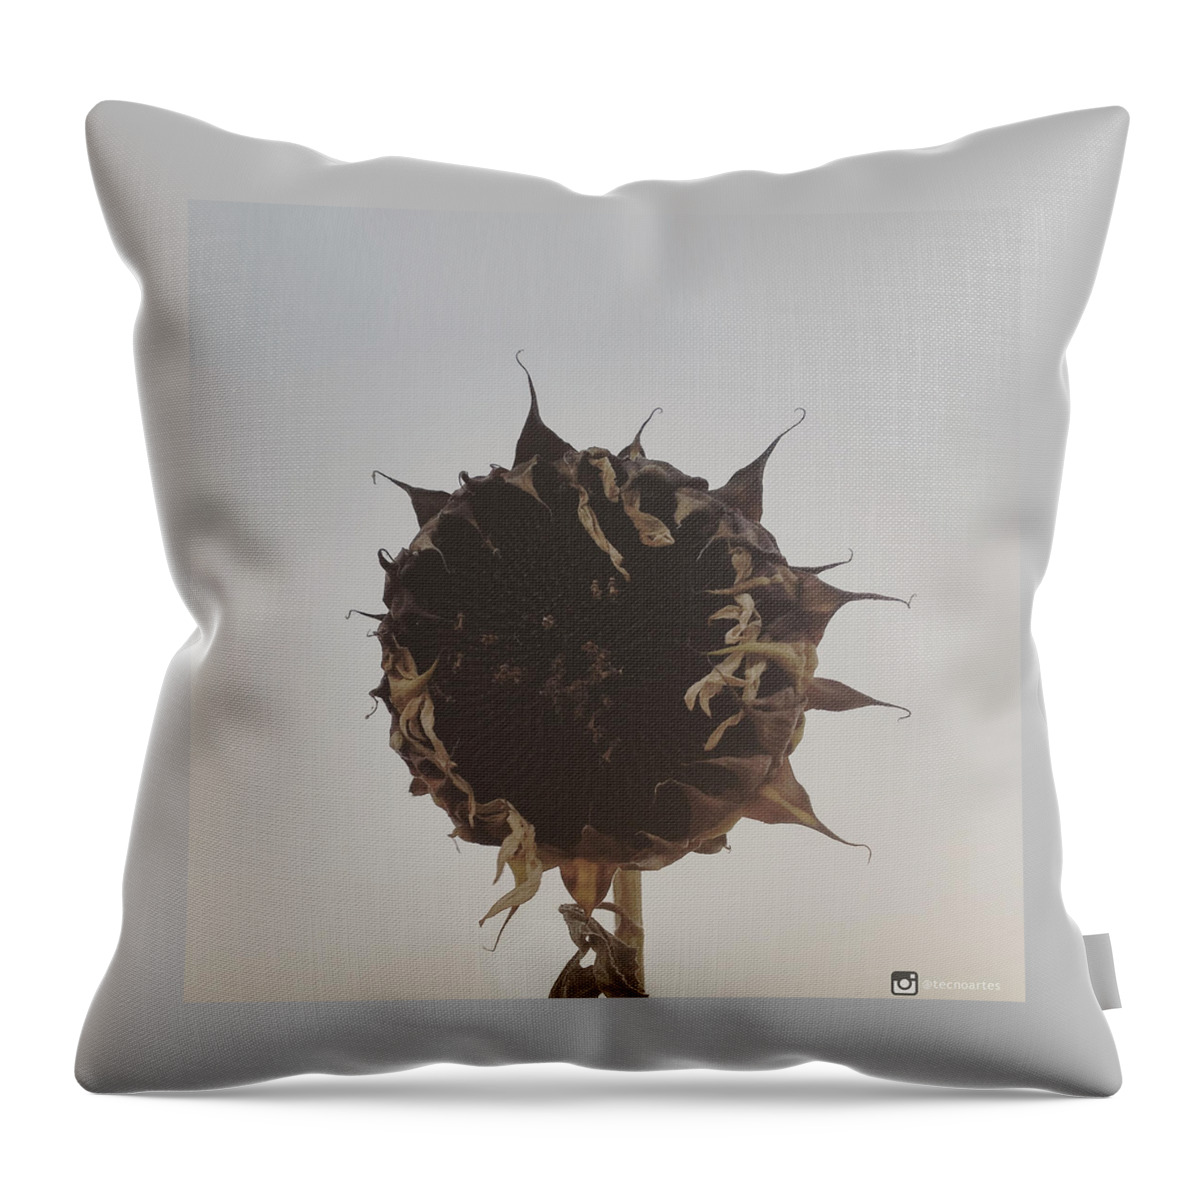 Withered Throw Pillow featuring the photograph Dead Sunflower by Miguel Angel